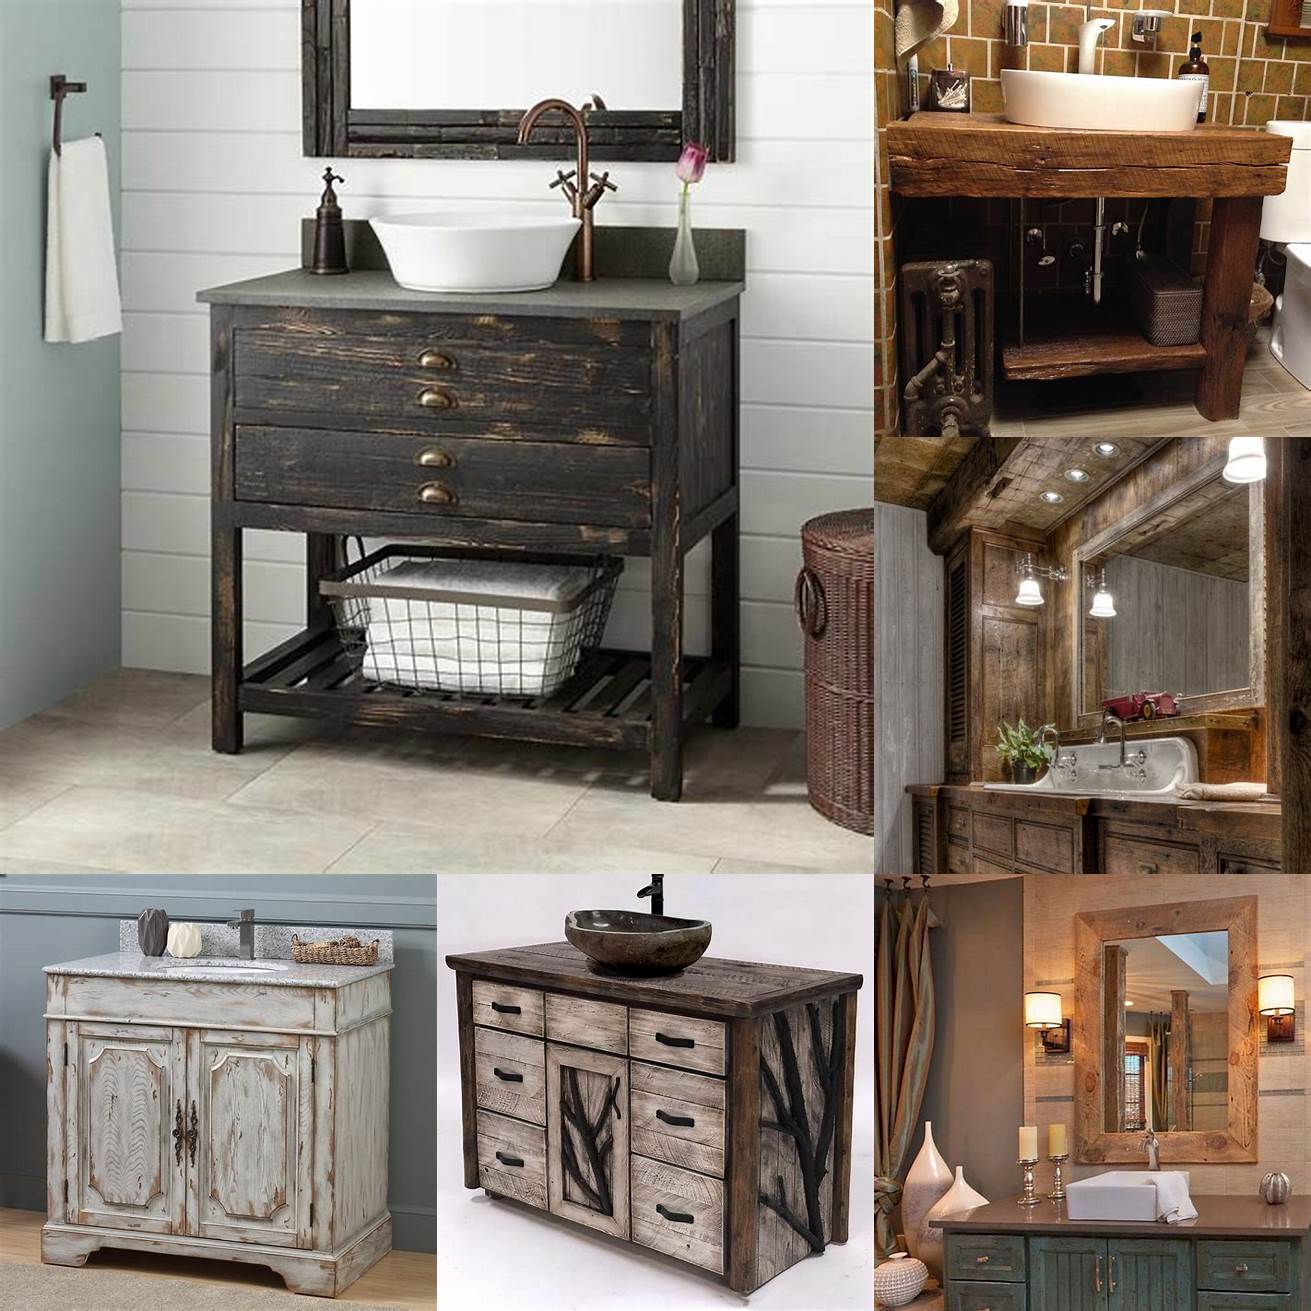 A rustic bathroom vanity with a distressed finish can add an antique and vintage look to your bathroom